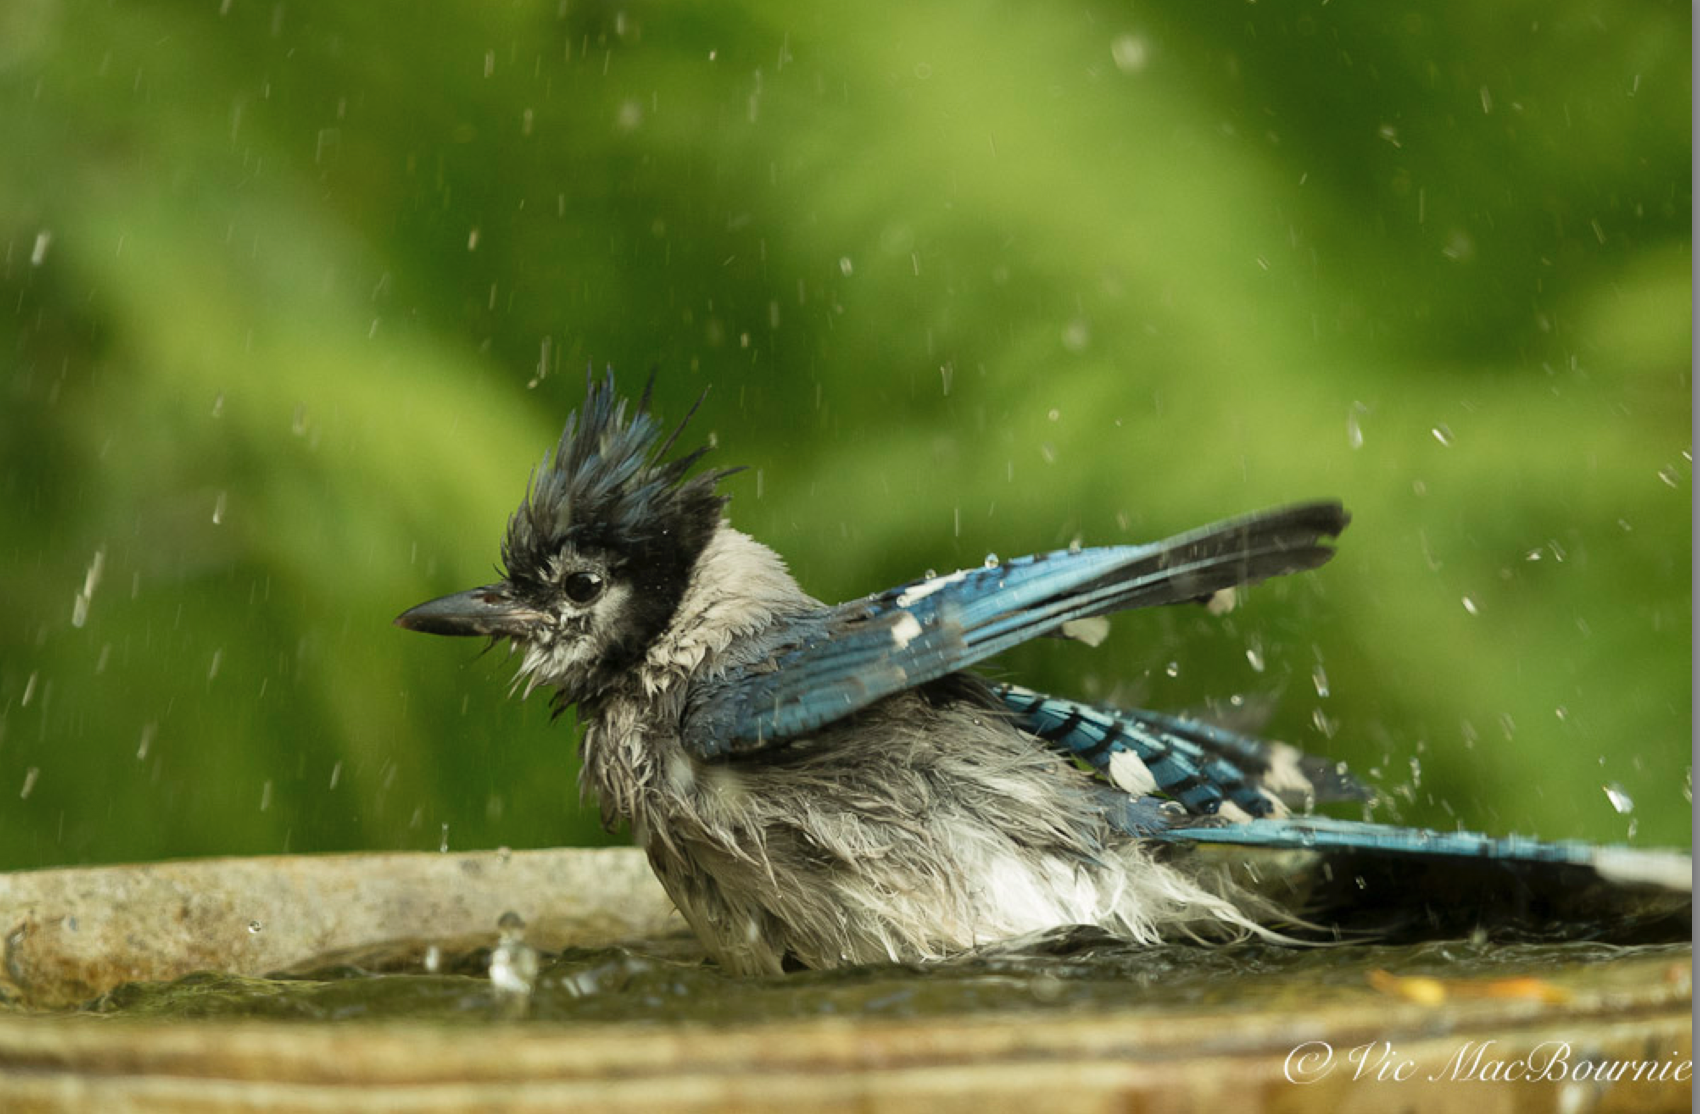 Blue Jays love their bird baths. Here is one of our resident blue jays diving in for a good soaking.